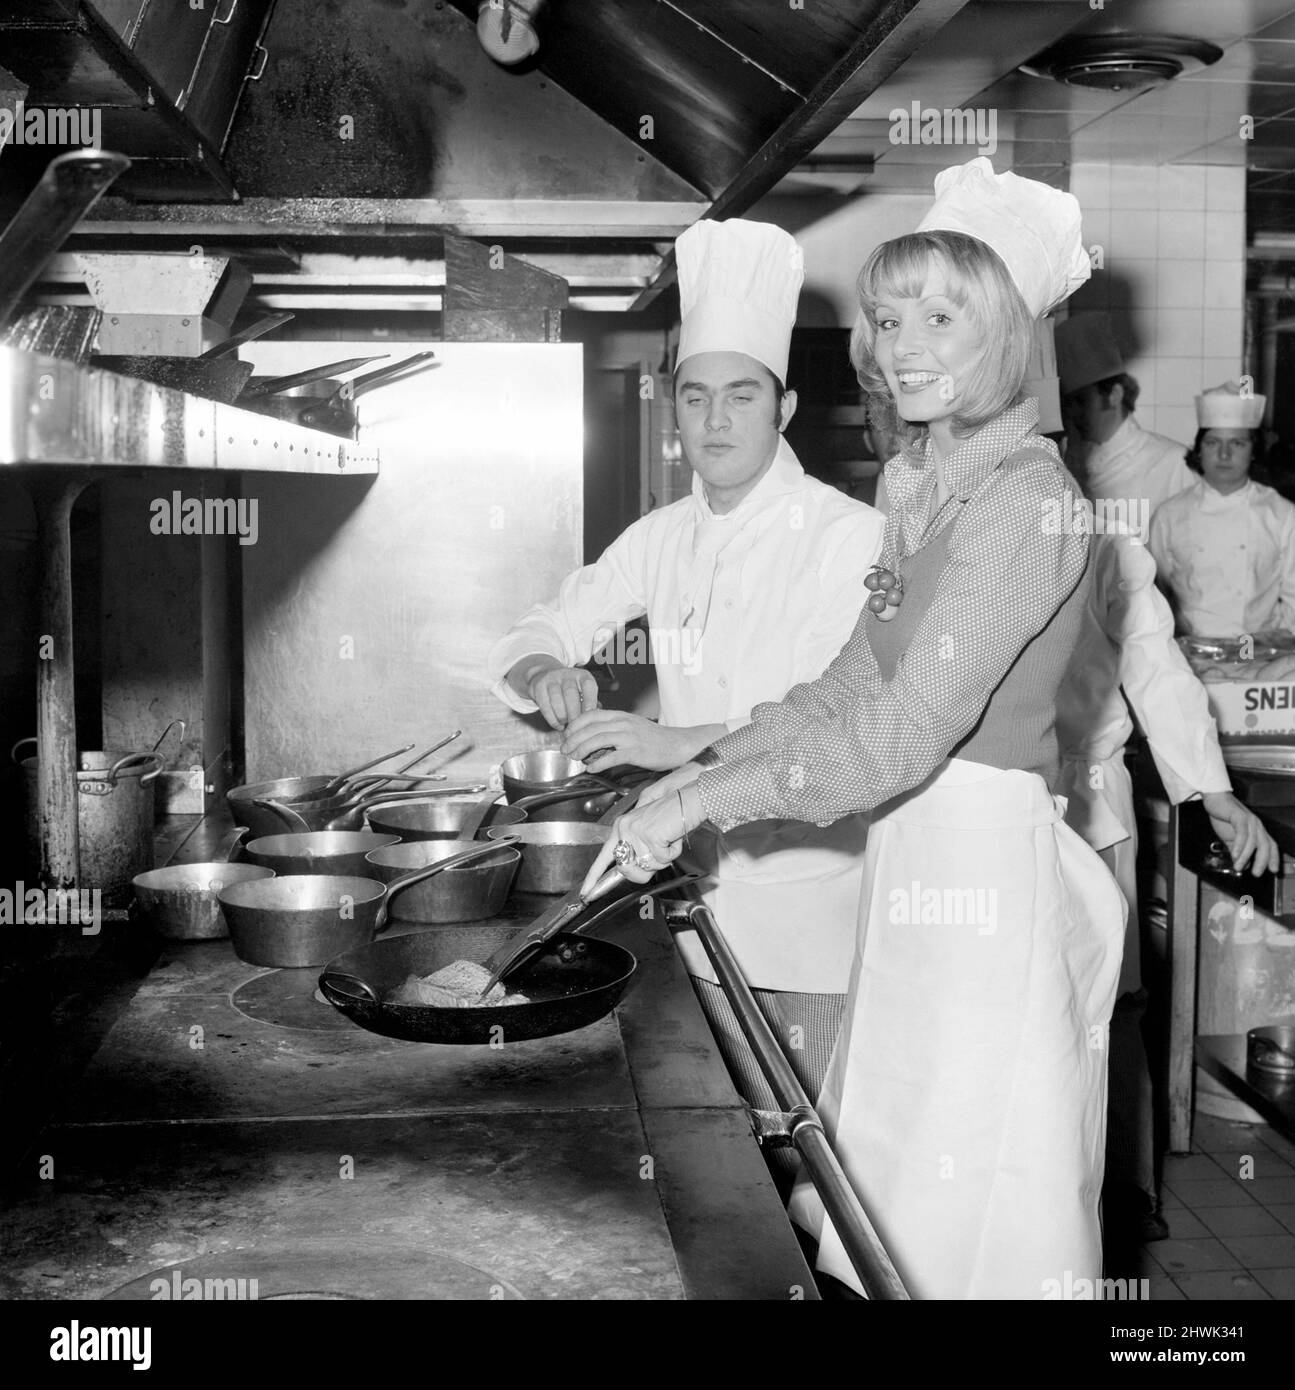 Miss World, 1972: Belinda Green: 20 year old Belinda Green, a blonde haired, blue eyed, model from Australia, won the Miss World Contest. Belinda's favourite hobby is cooking. Belinda in the kitchens of the Britannia Hotel, where she is staying, making herself something to eat this morning. December 1972 72-11299-001 Stock Photo